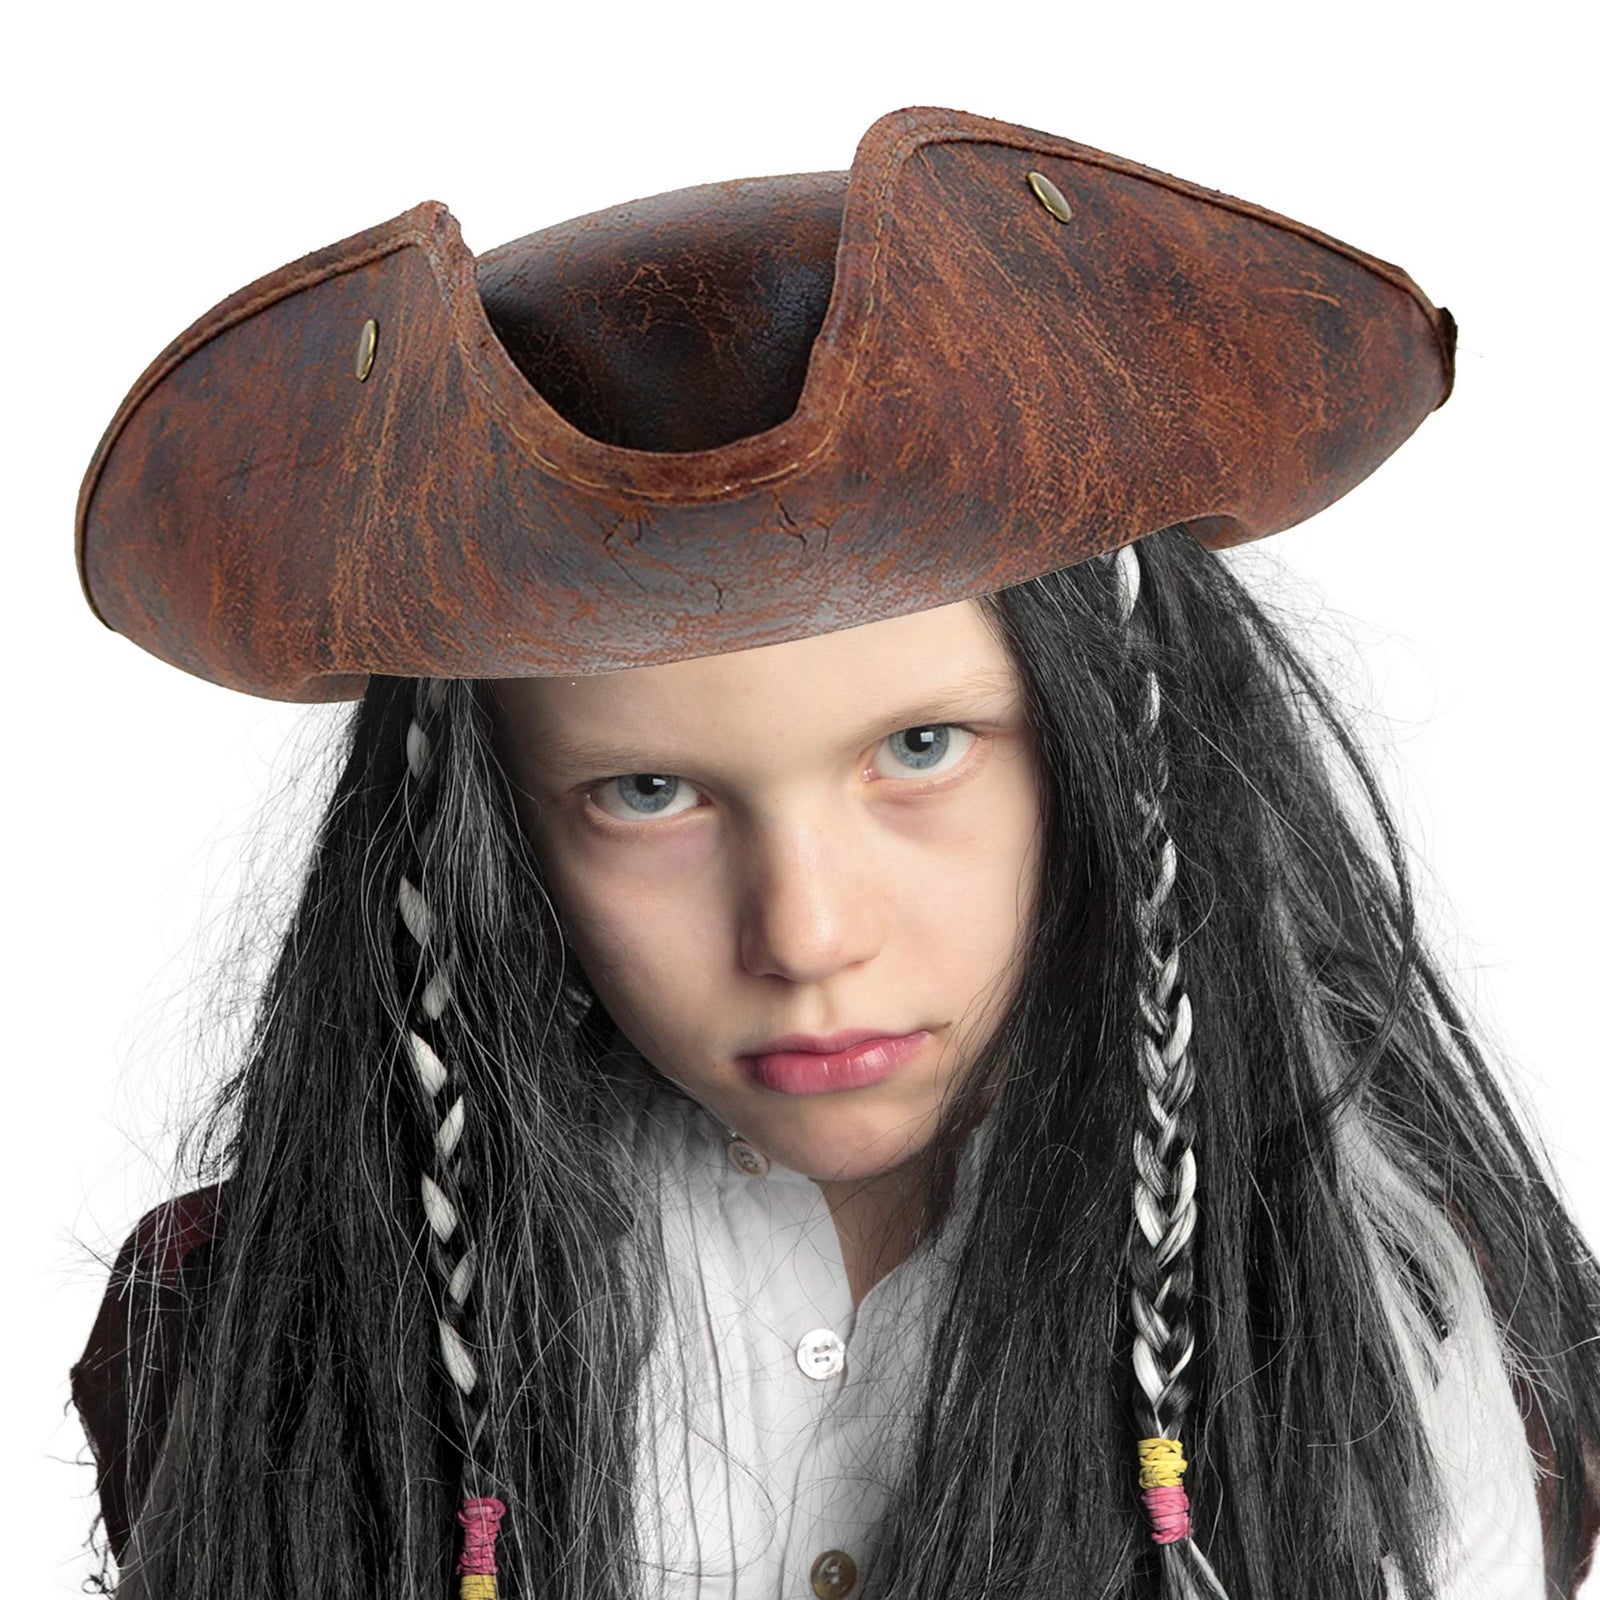 Skeleteen Faux Leather Pirate Hat - Brown Distressed Leather Colonial Style Tricorn Hat